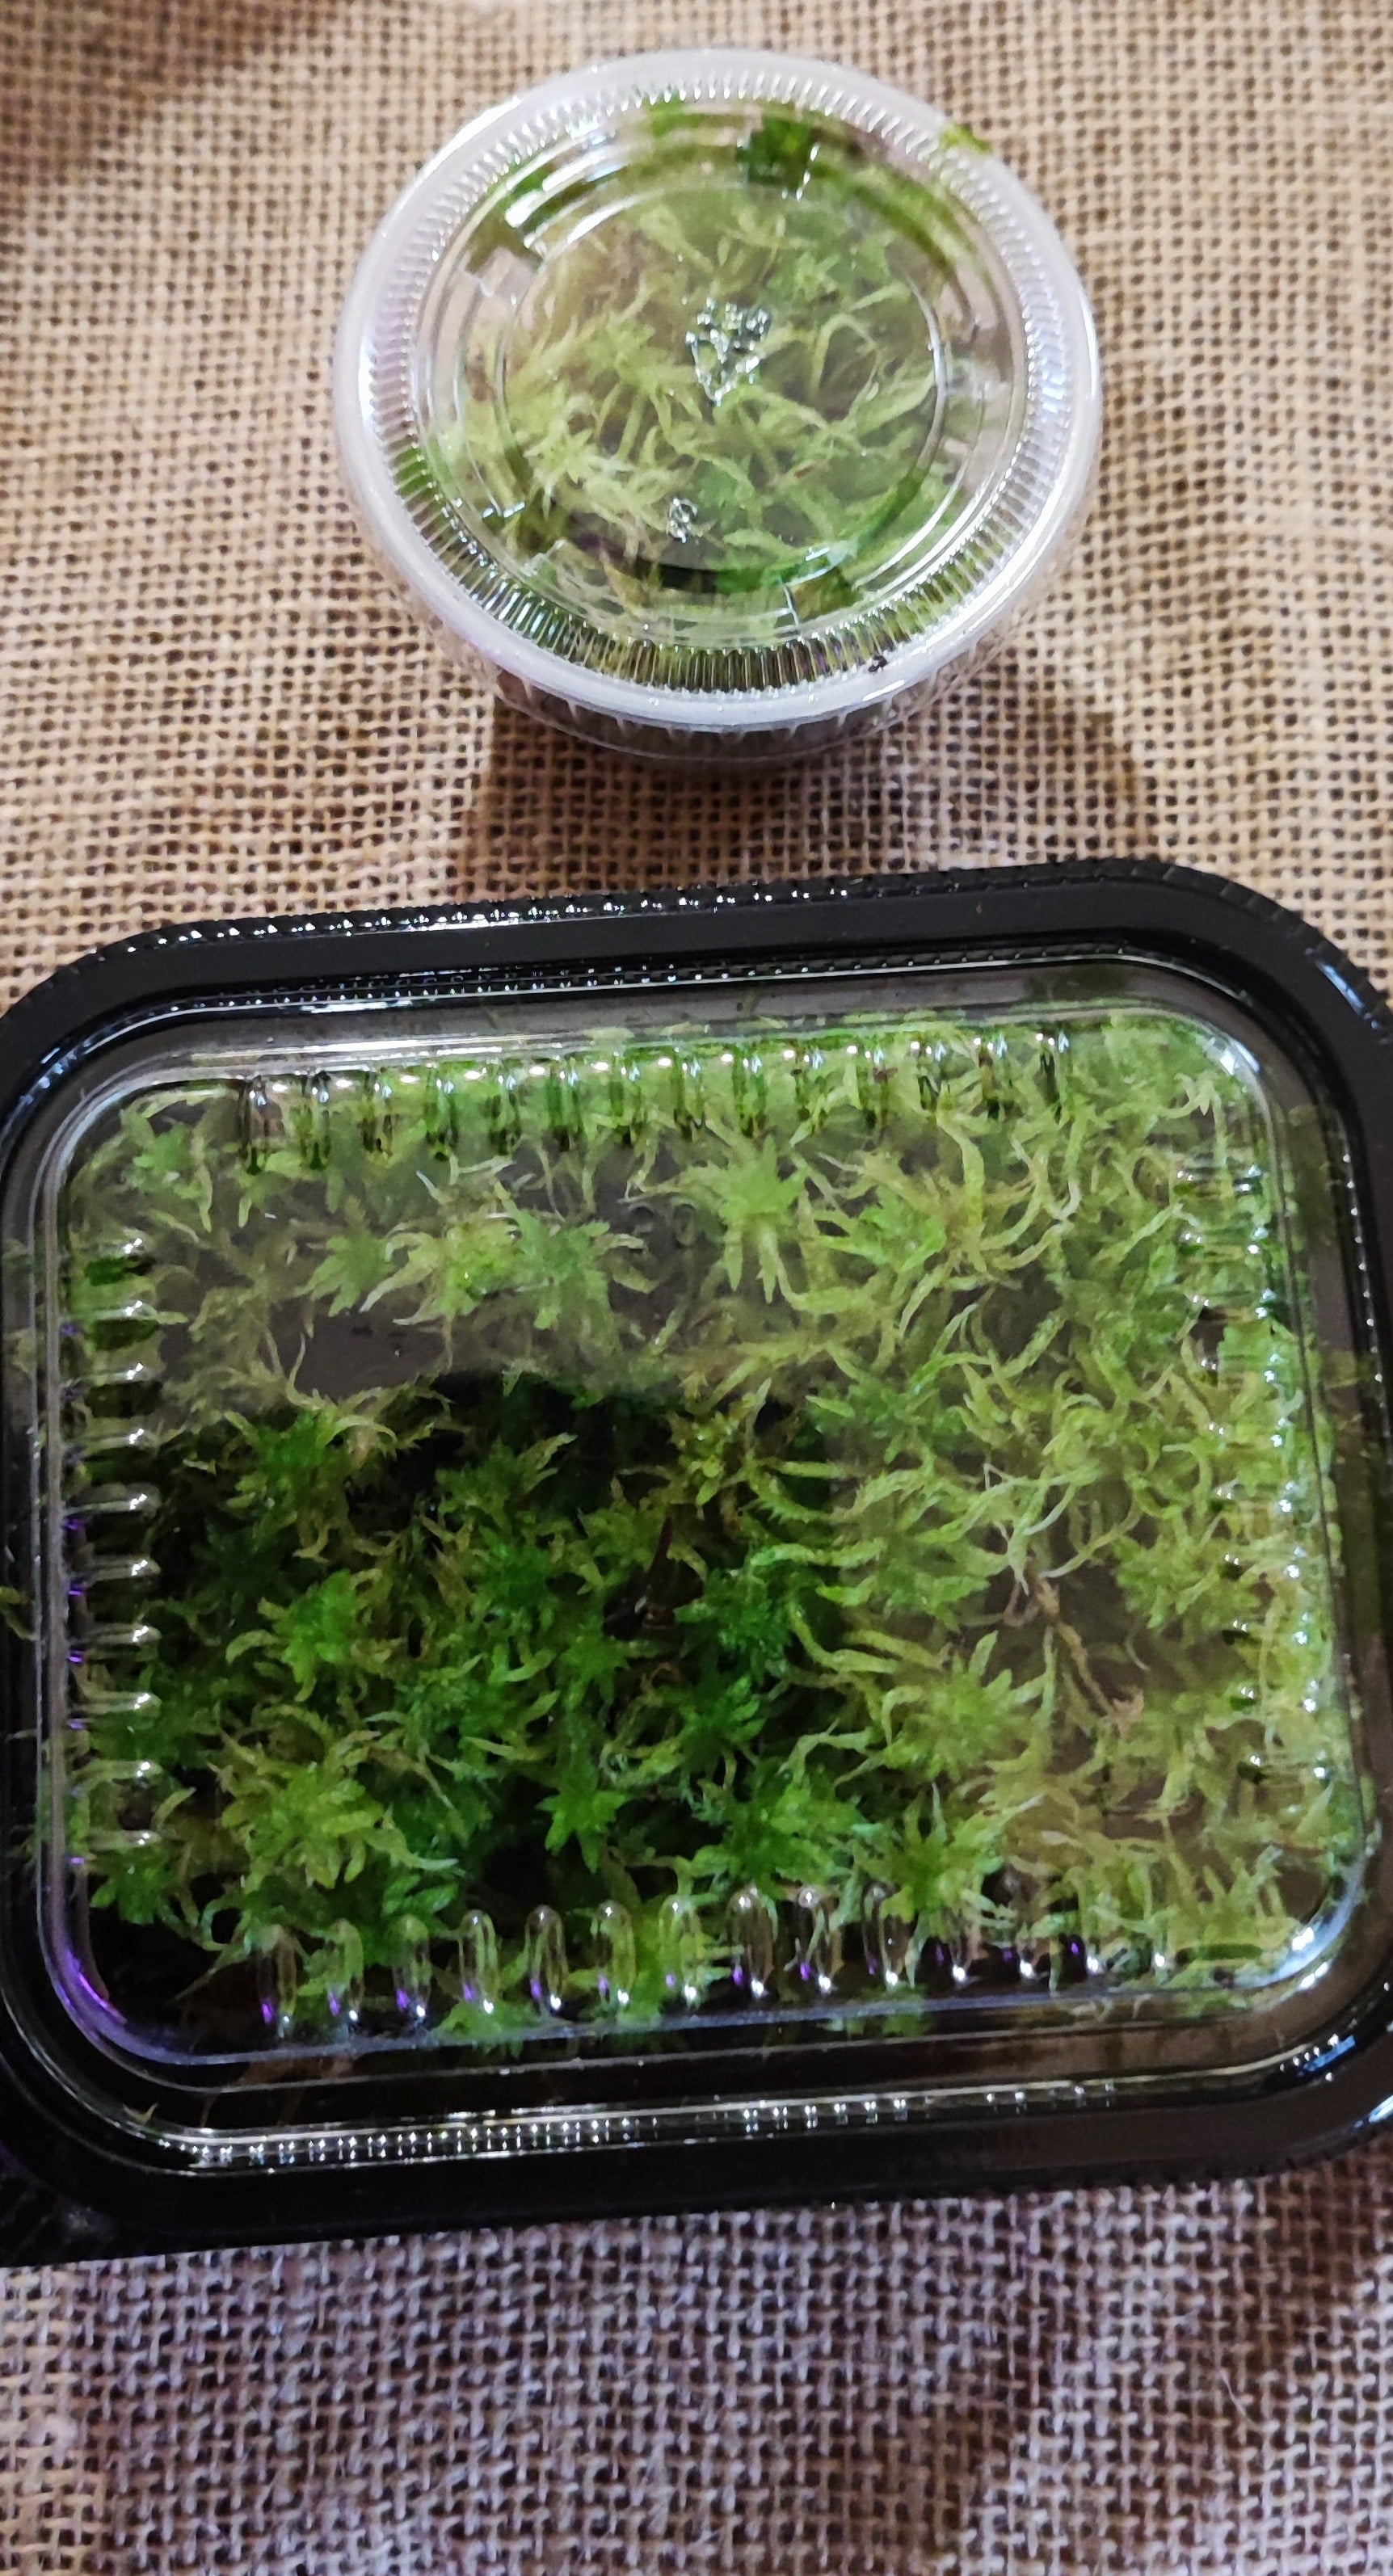 B/A Sphagnum Moss for Orchids - Green Dry Sphagnum Moss